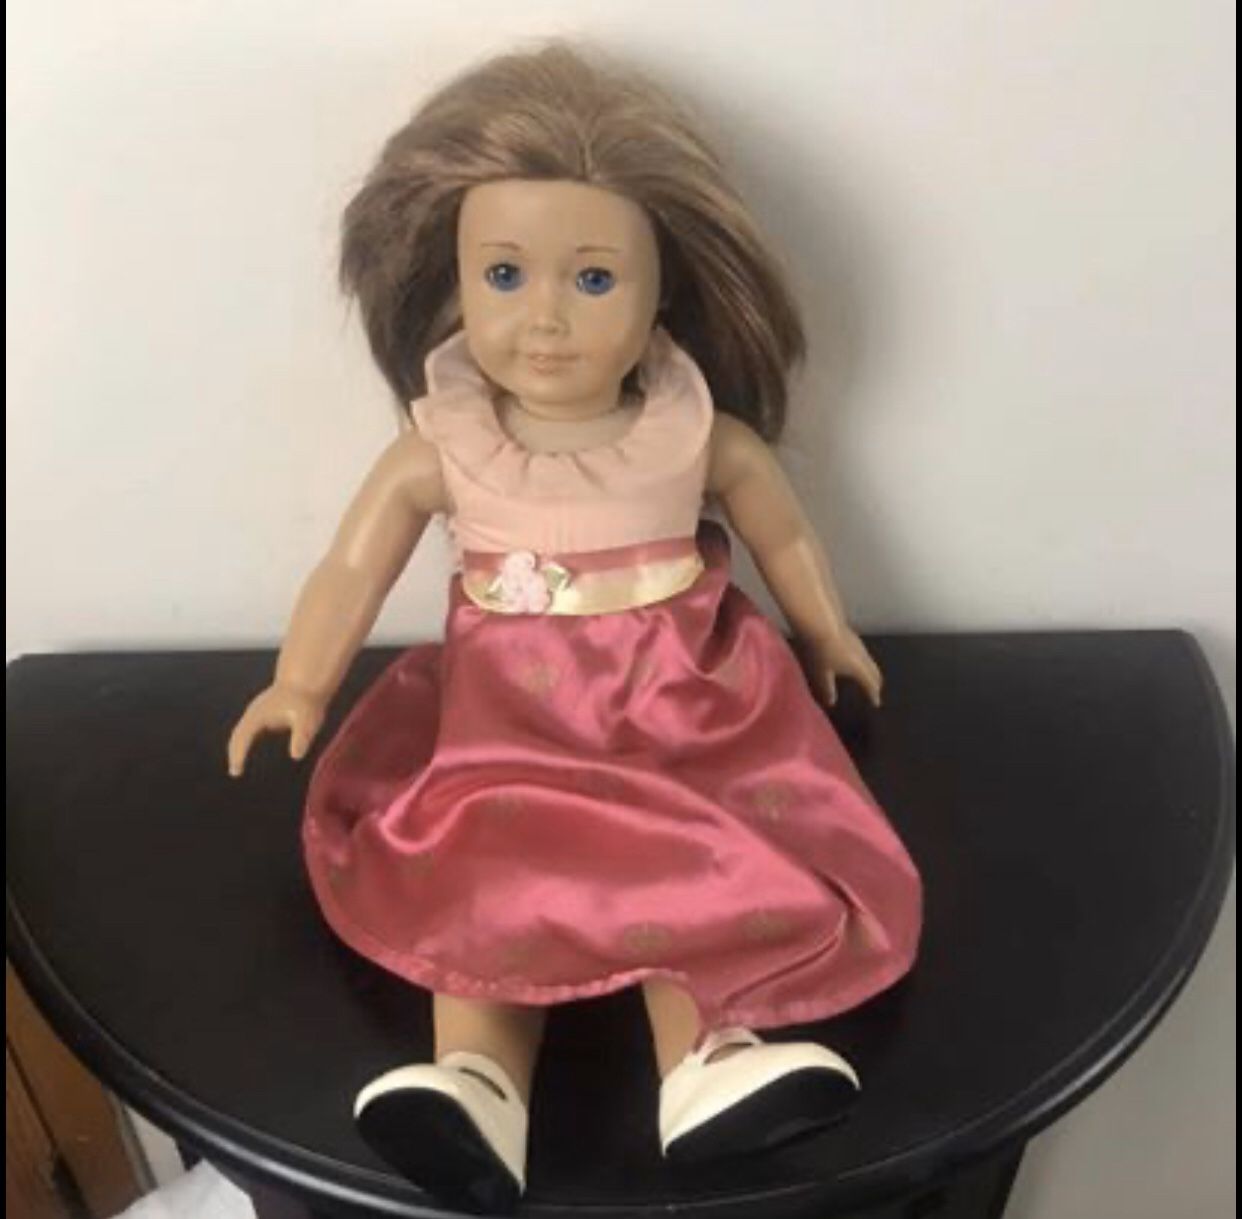 American girl doll ear pierced and dress included